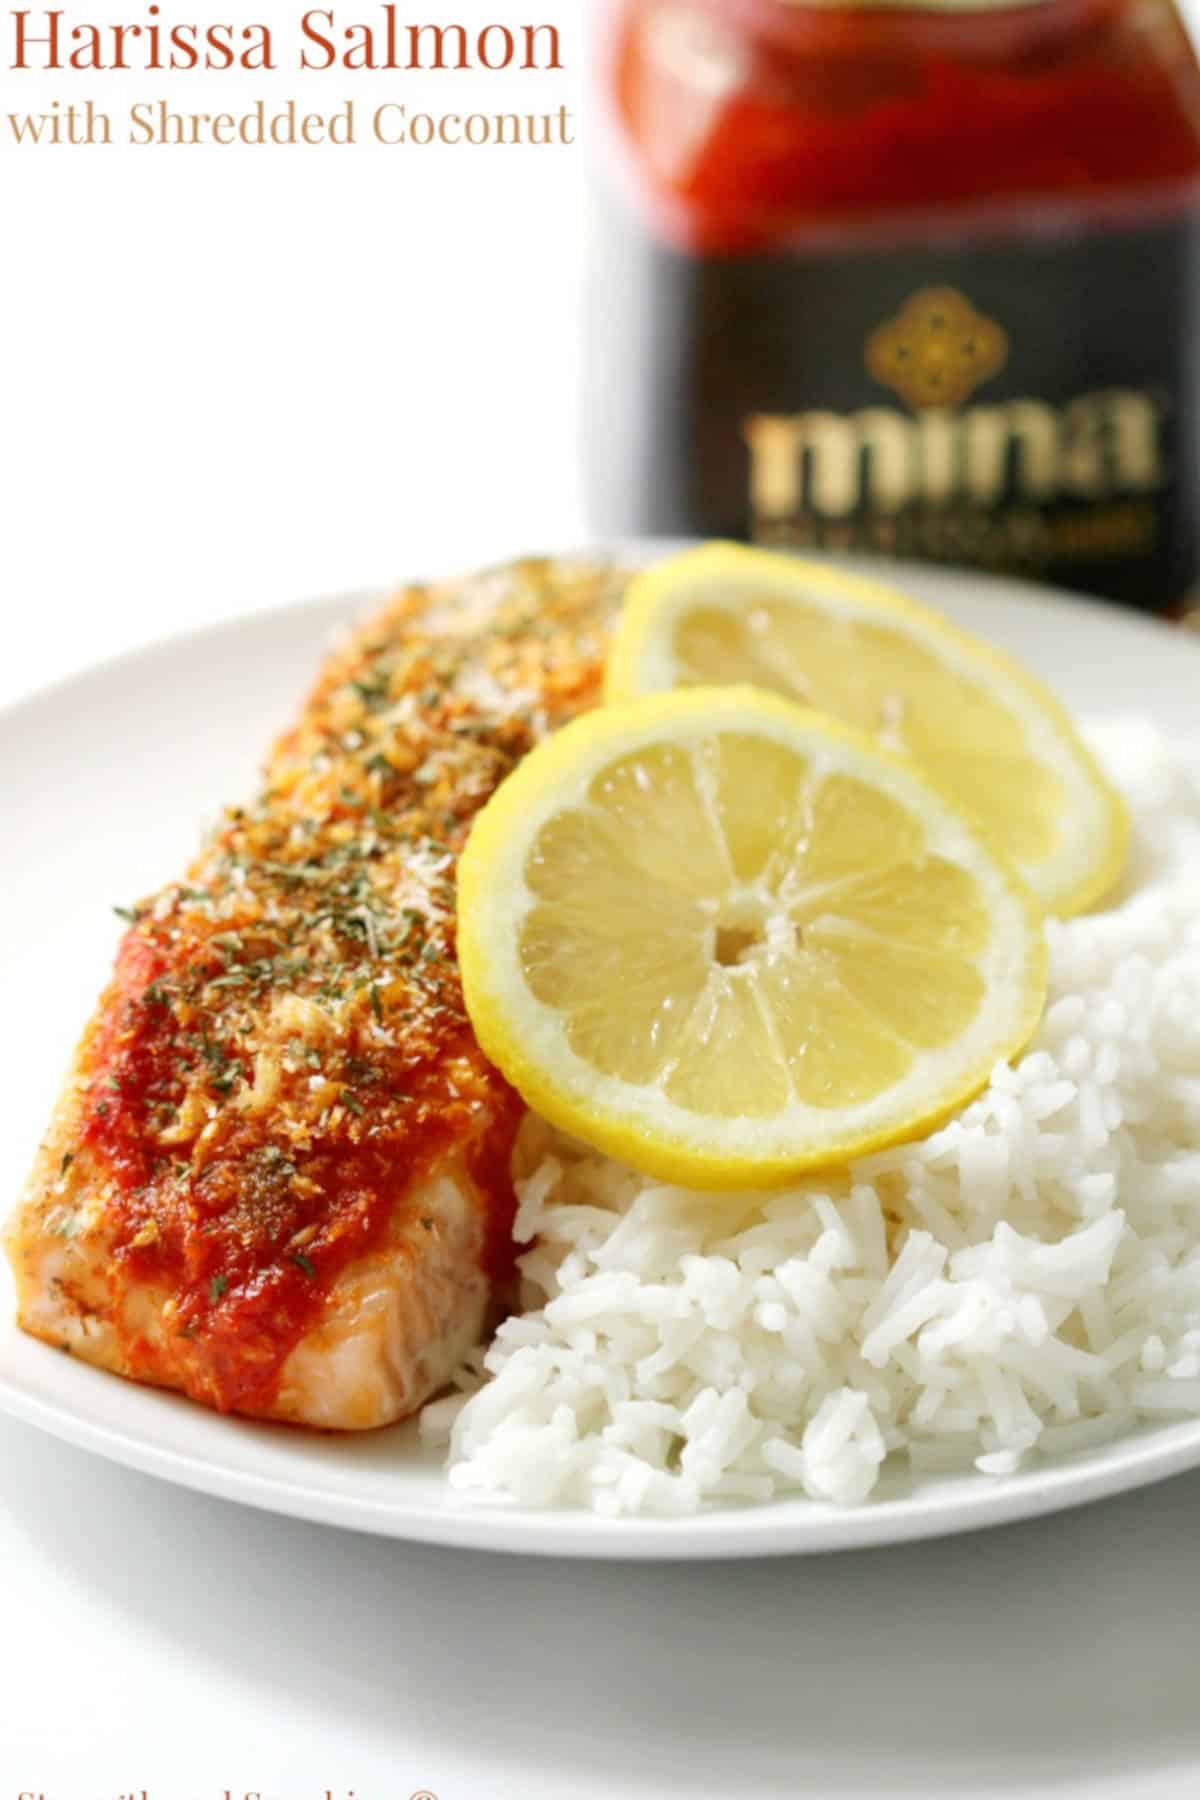 Harissa salmon on a plate with cooked rice and slices of lemon.